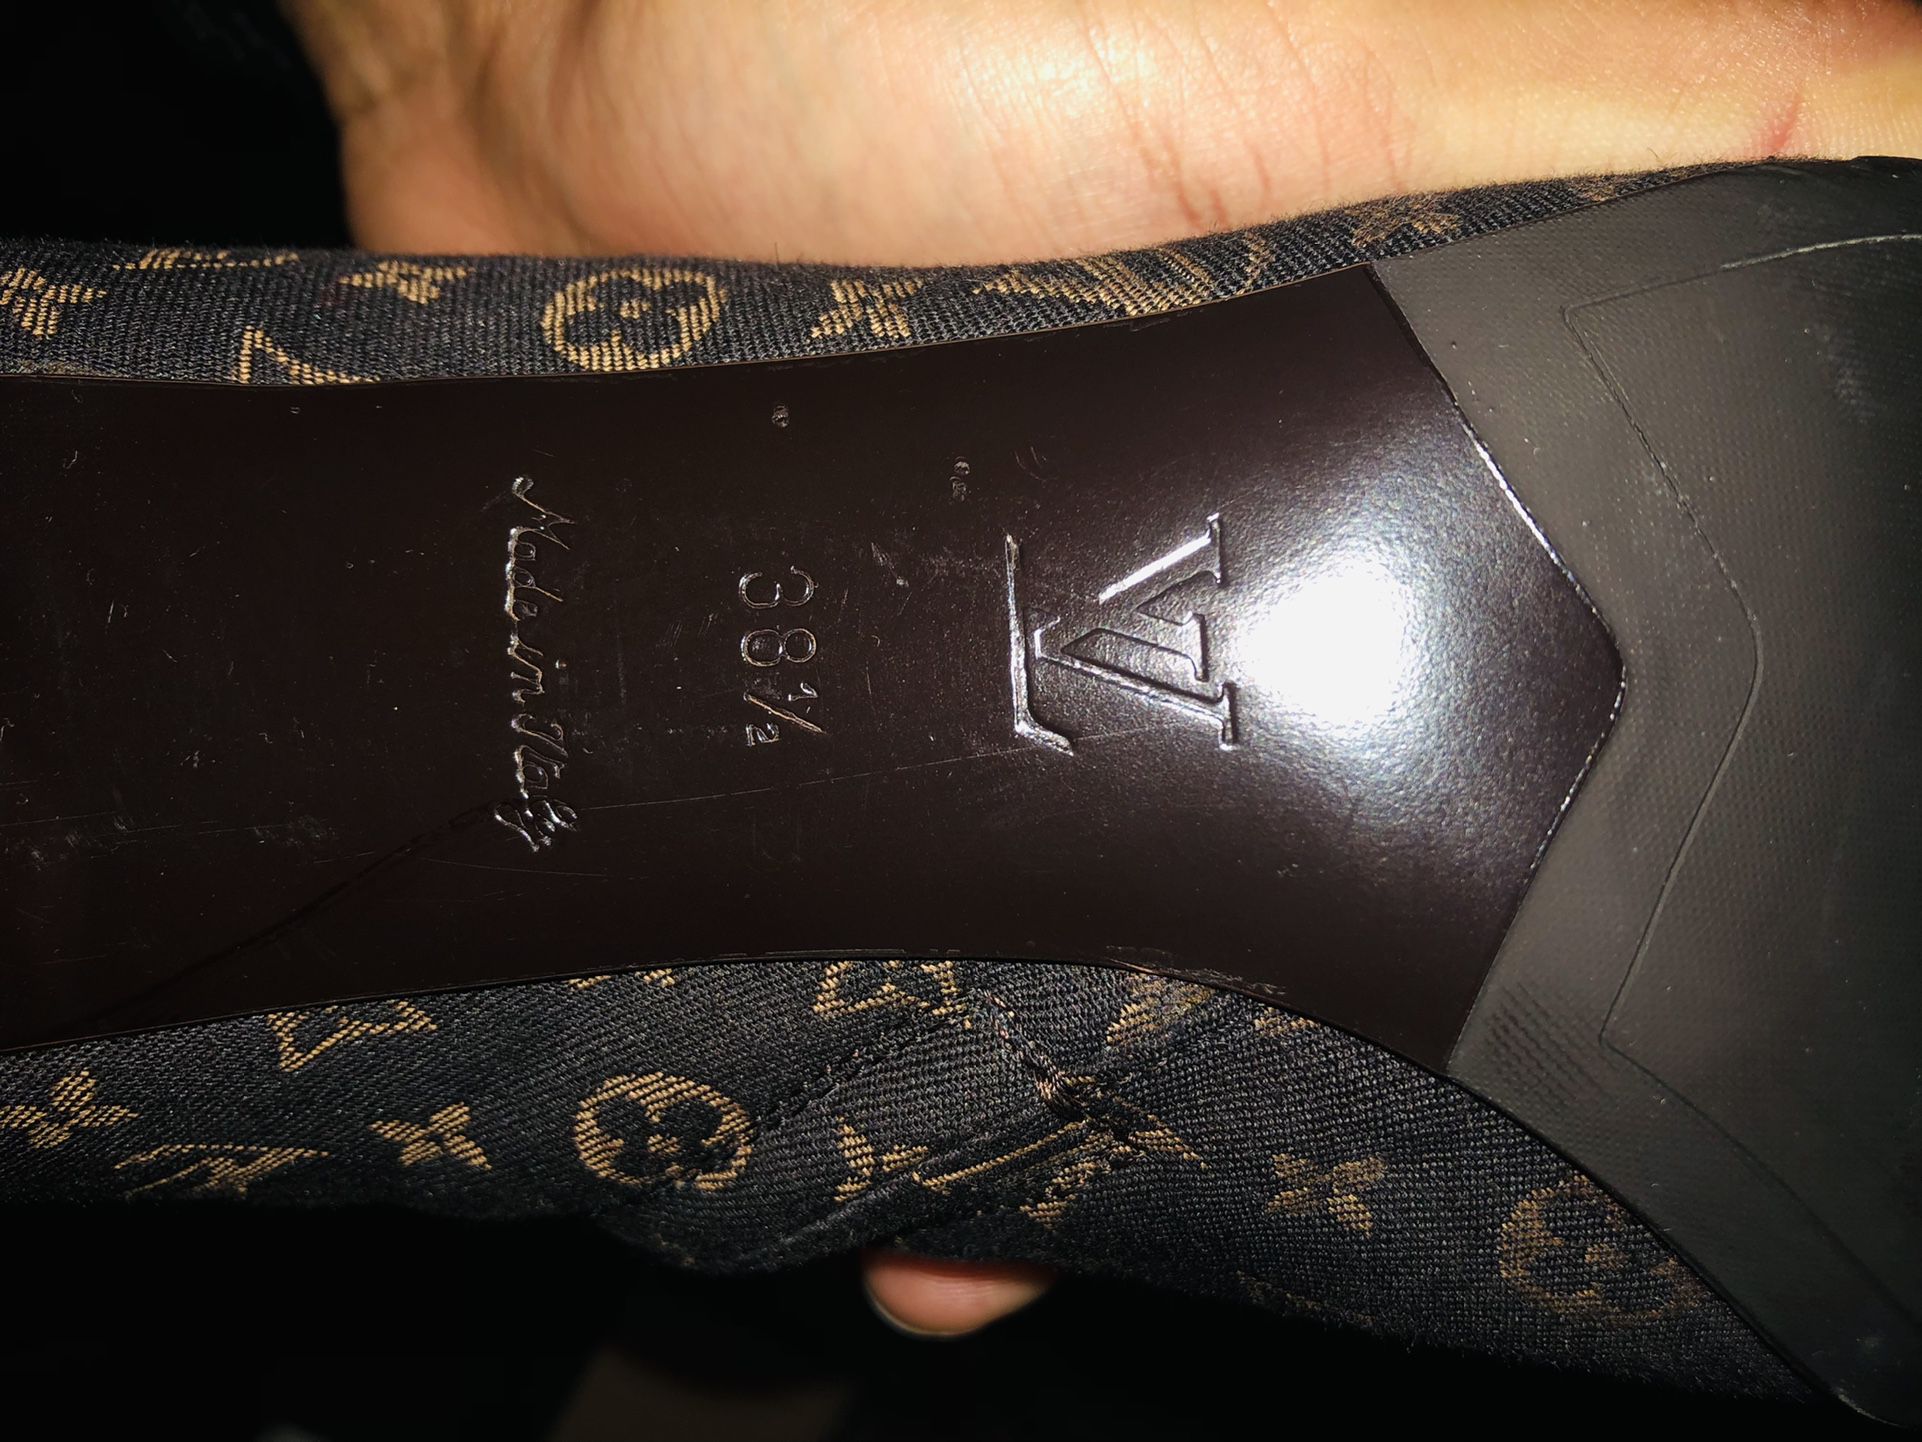 L/V*** Boots for Sale in Middletown, NY - OfferUp  Louis vuitton boots, Louis  vuitton shoes heels, Louis vuitton shoes